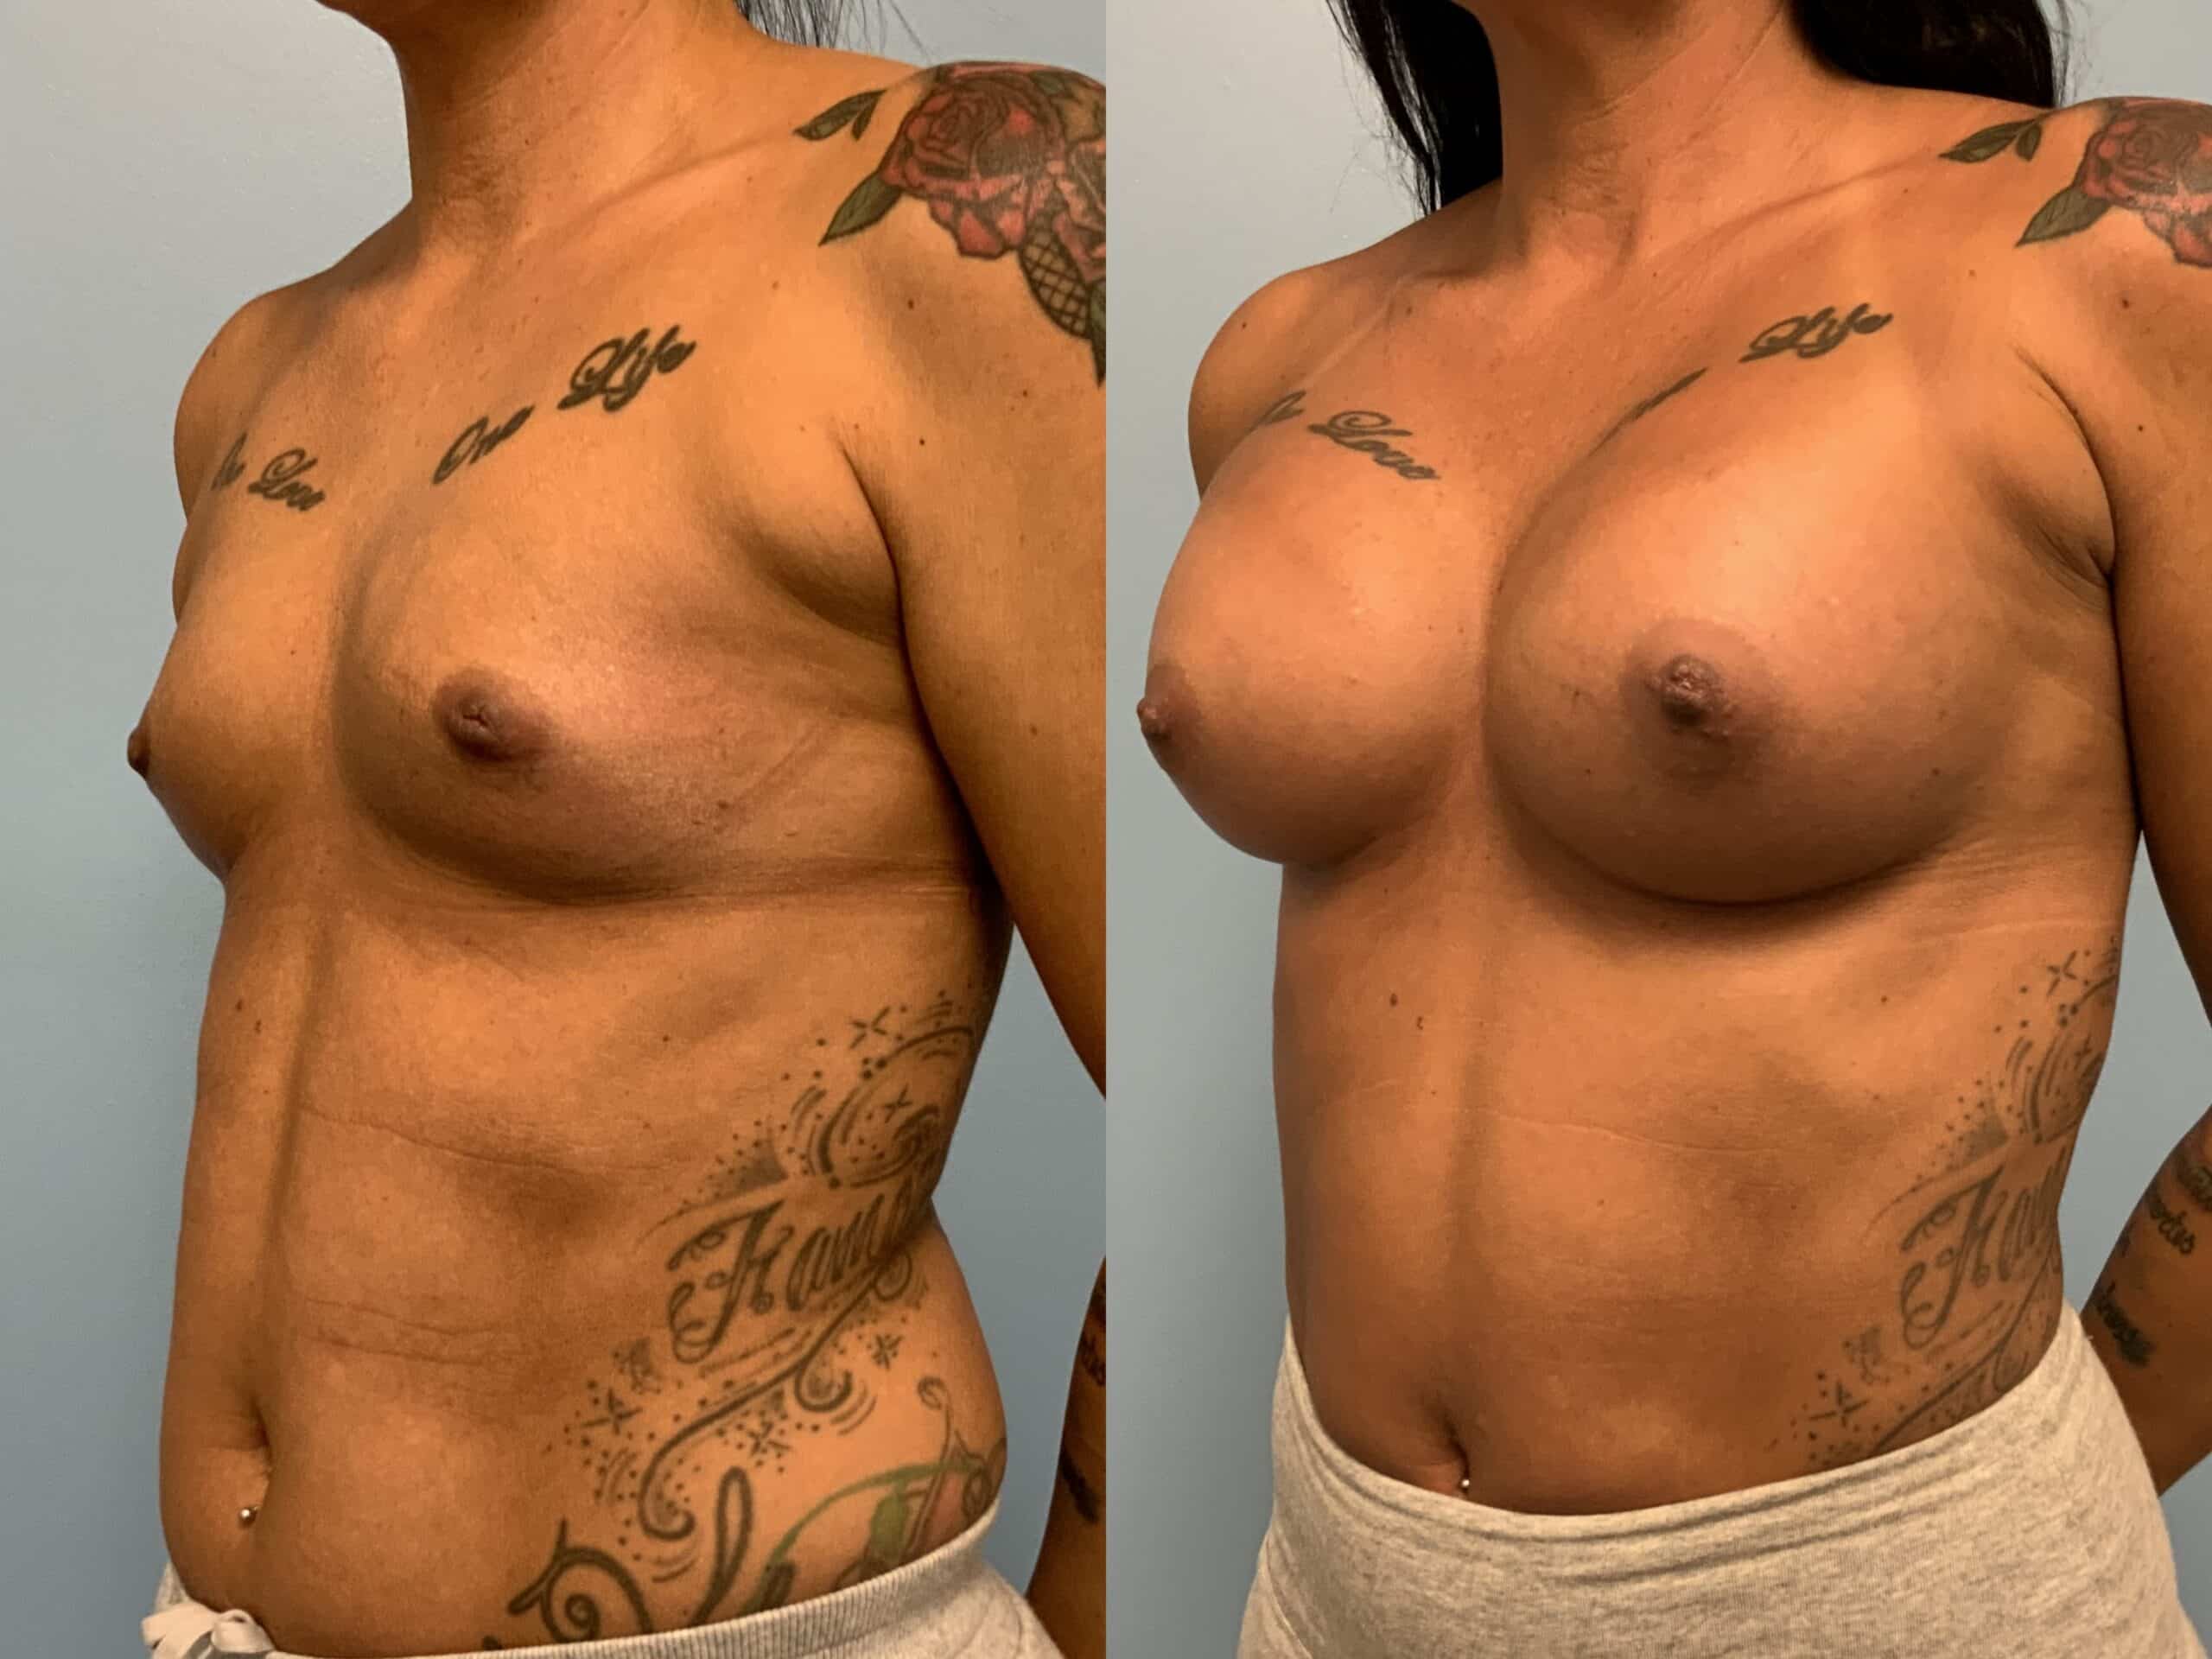 Patient before and after, 2 mo post op from Breast Augmentation and Level III Muscle Release procedures performed by Dr. Paul Vanek